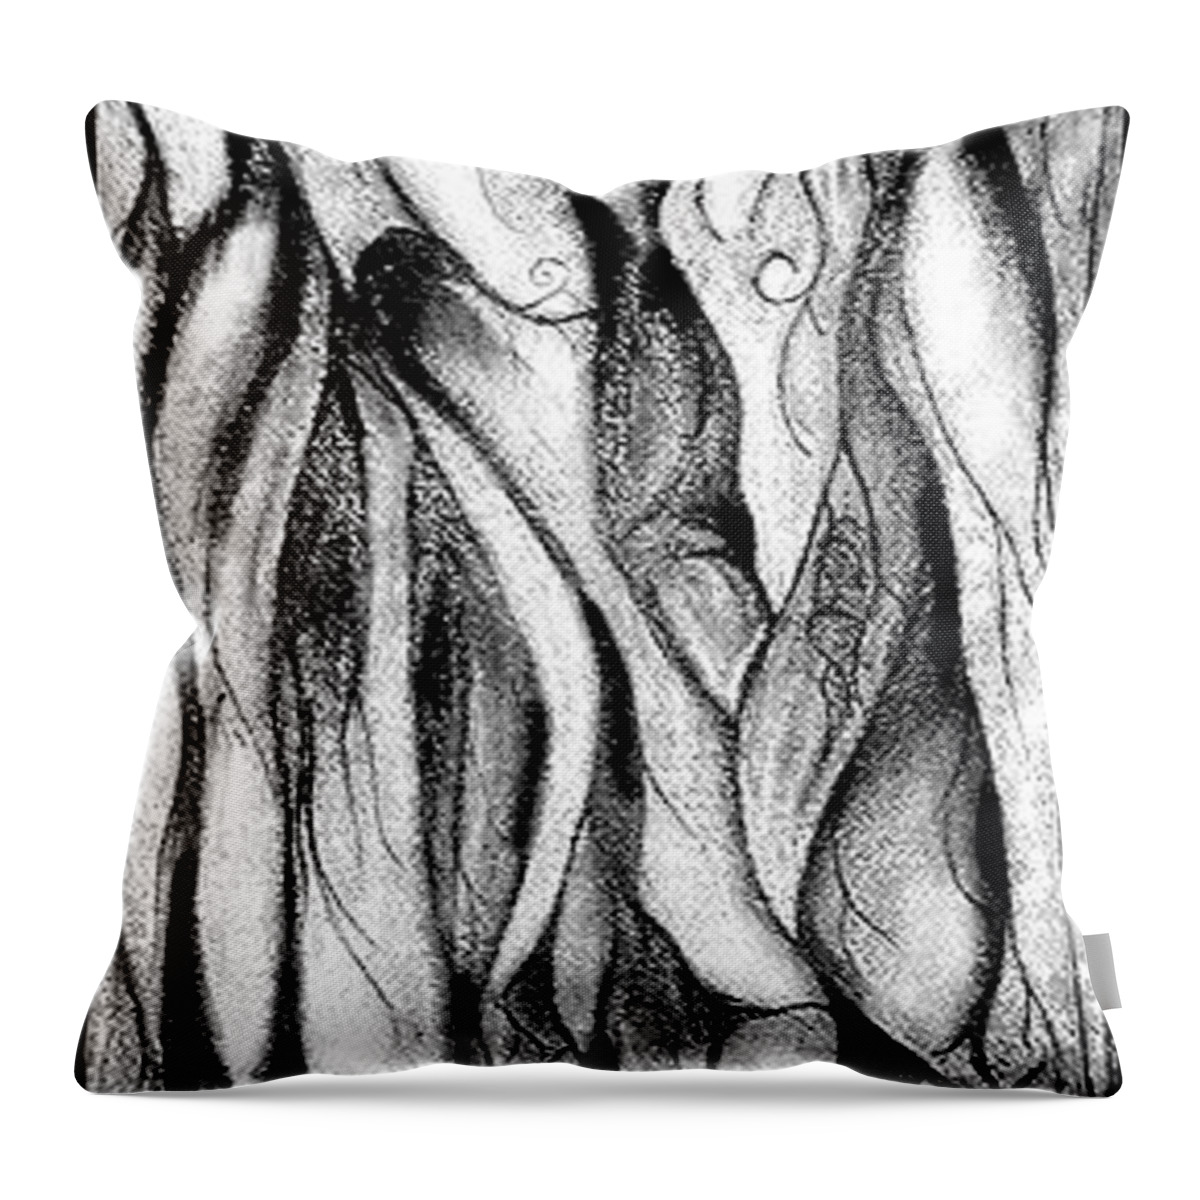 Lovers Series Throw Pillow featuring the drawing Loves Pedestal by James Lanigan Thompson MFA